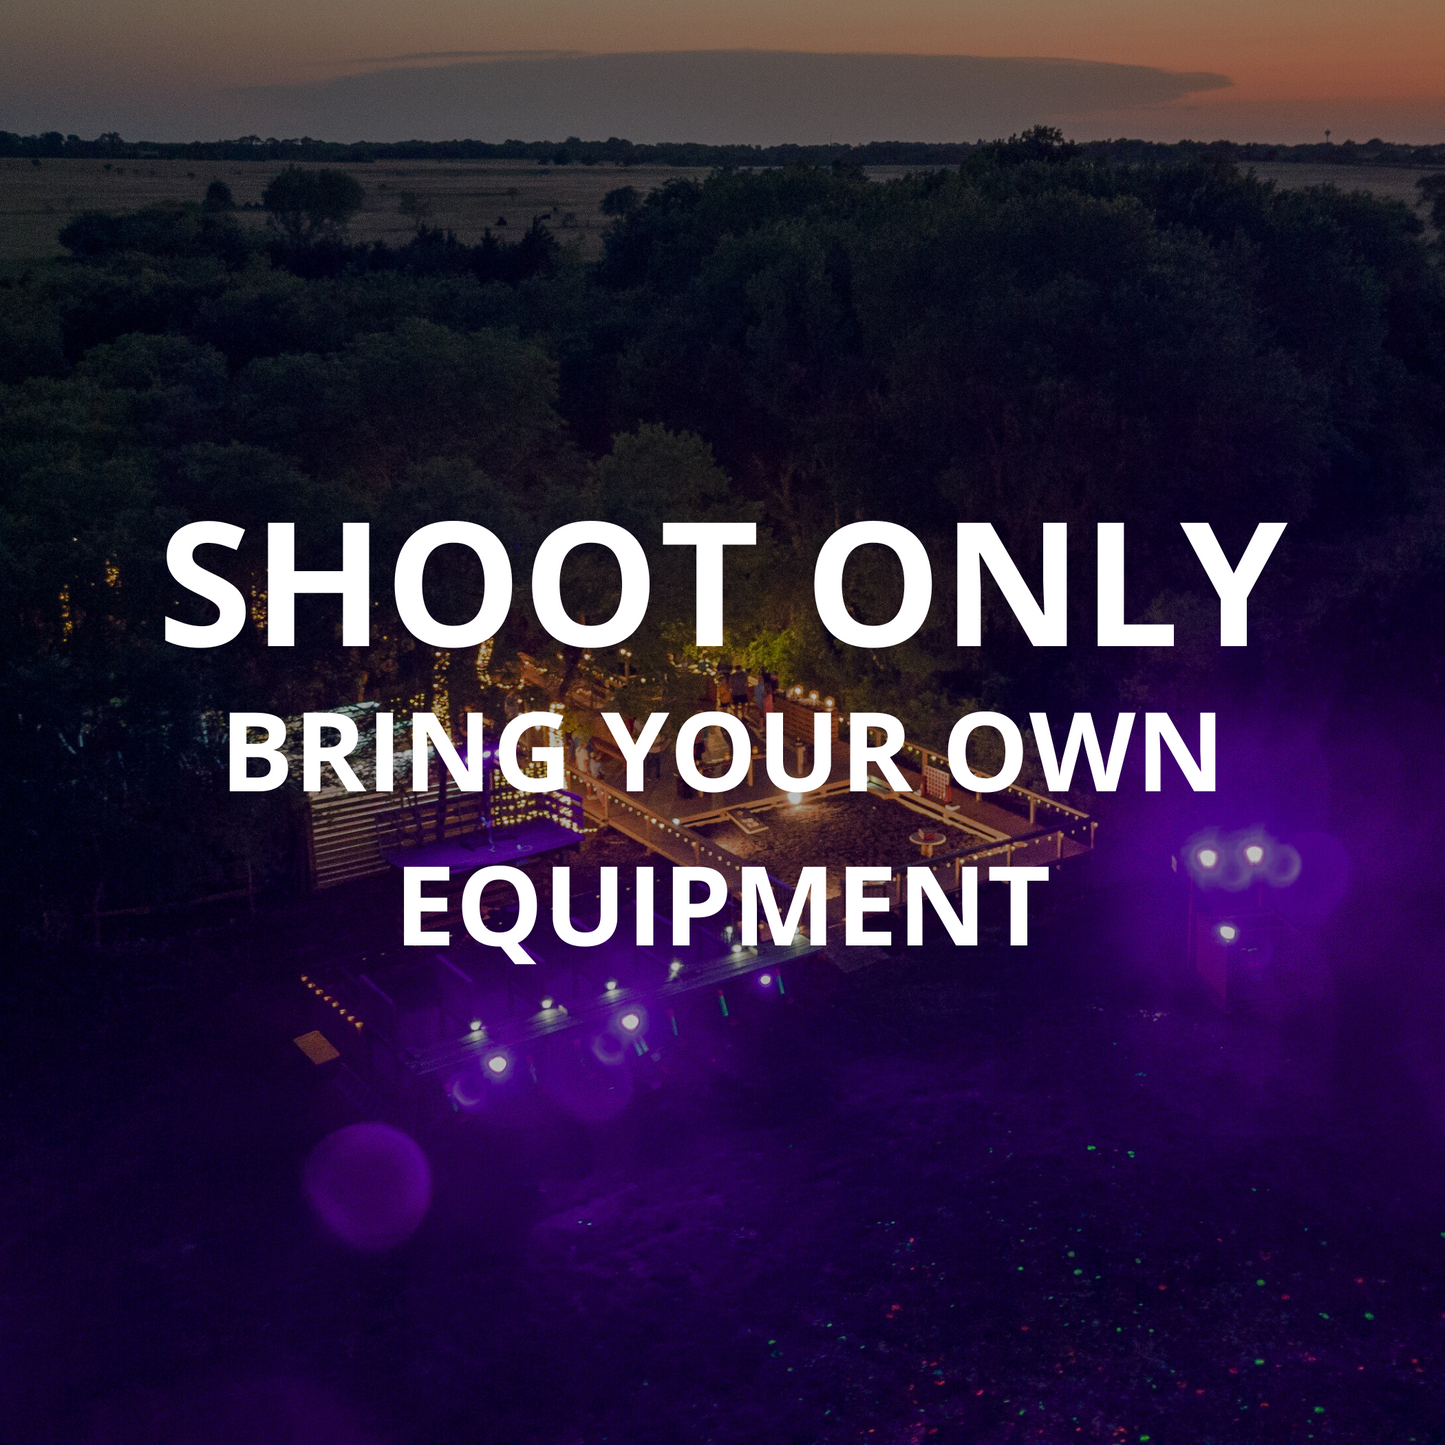 Shoot Only: Bring Your Own Equipment $125 Per Person